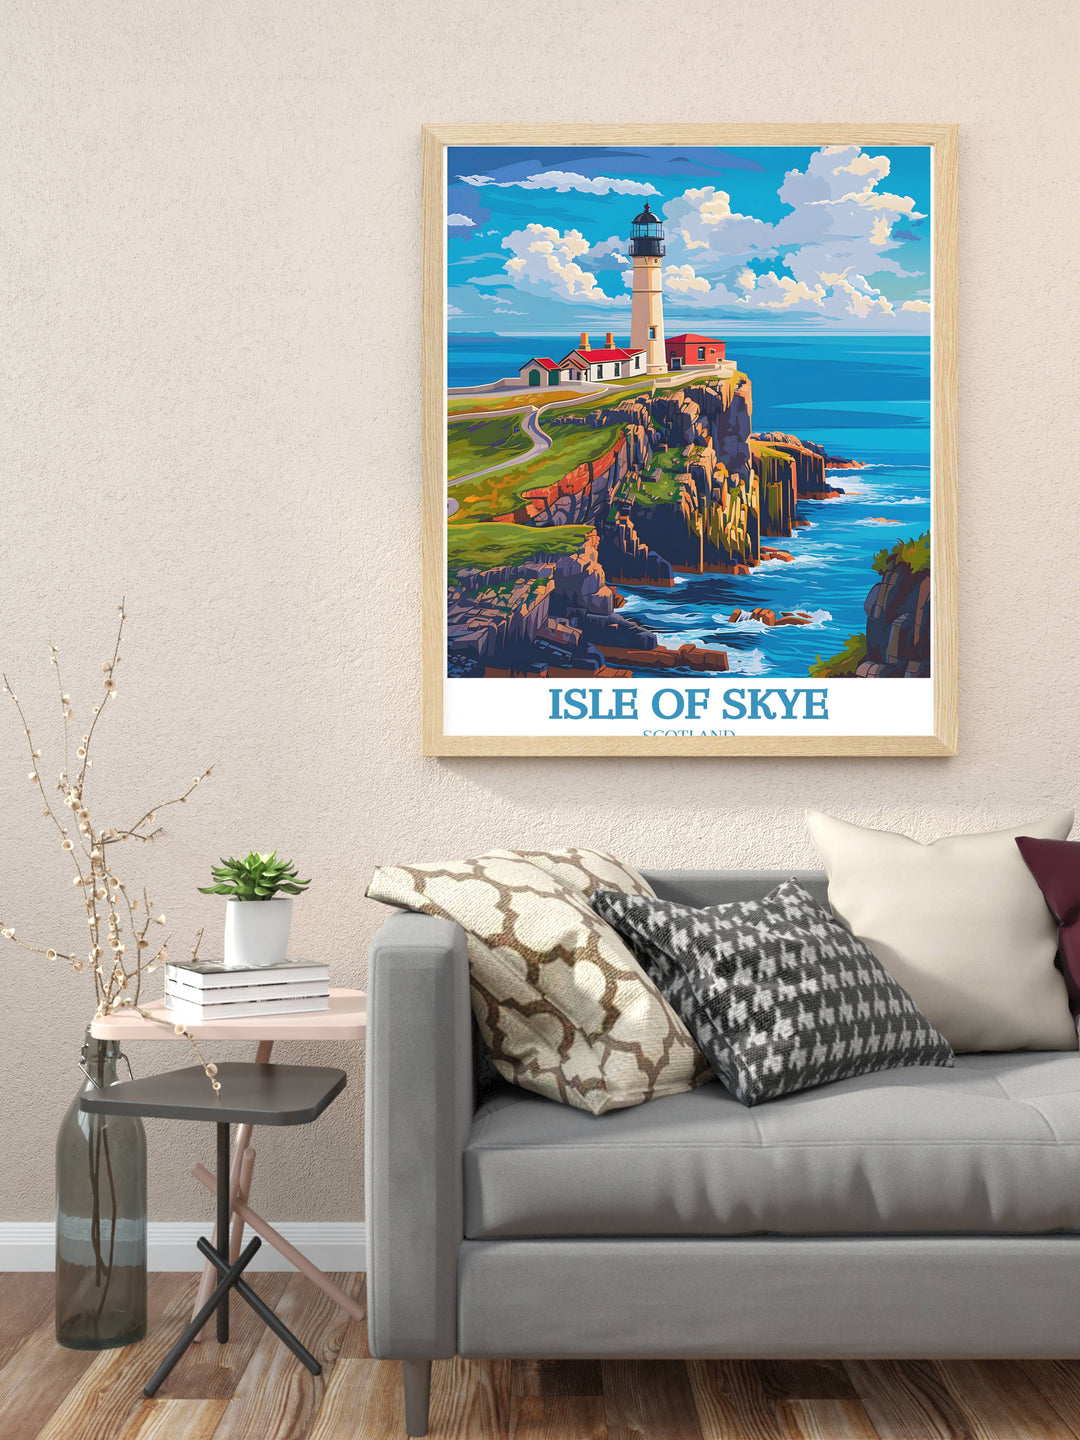 Poster of Isle of Skye at sunset with vivid colors casting over the tranquil sea, perfect for creating a peaceful ambiance.